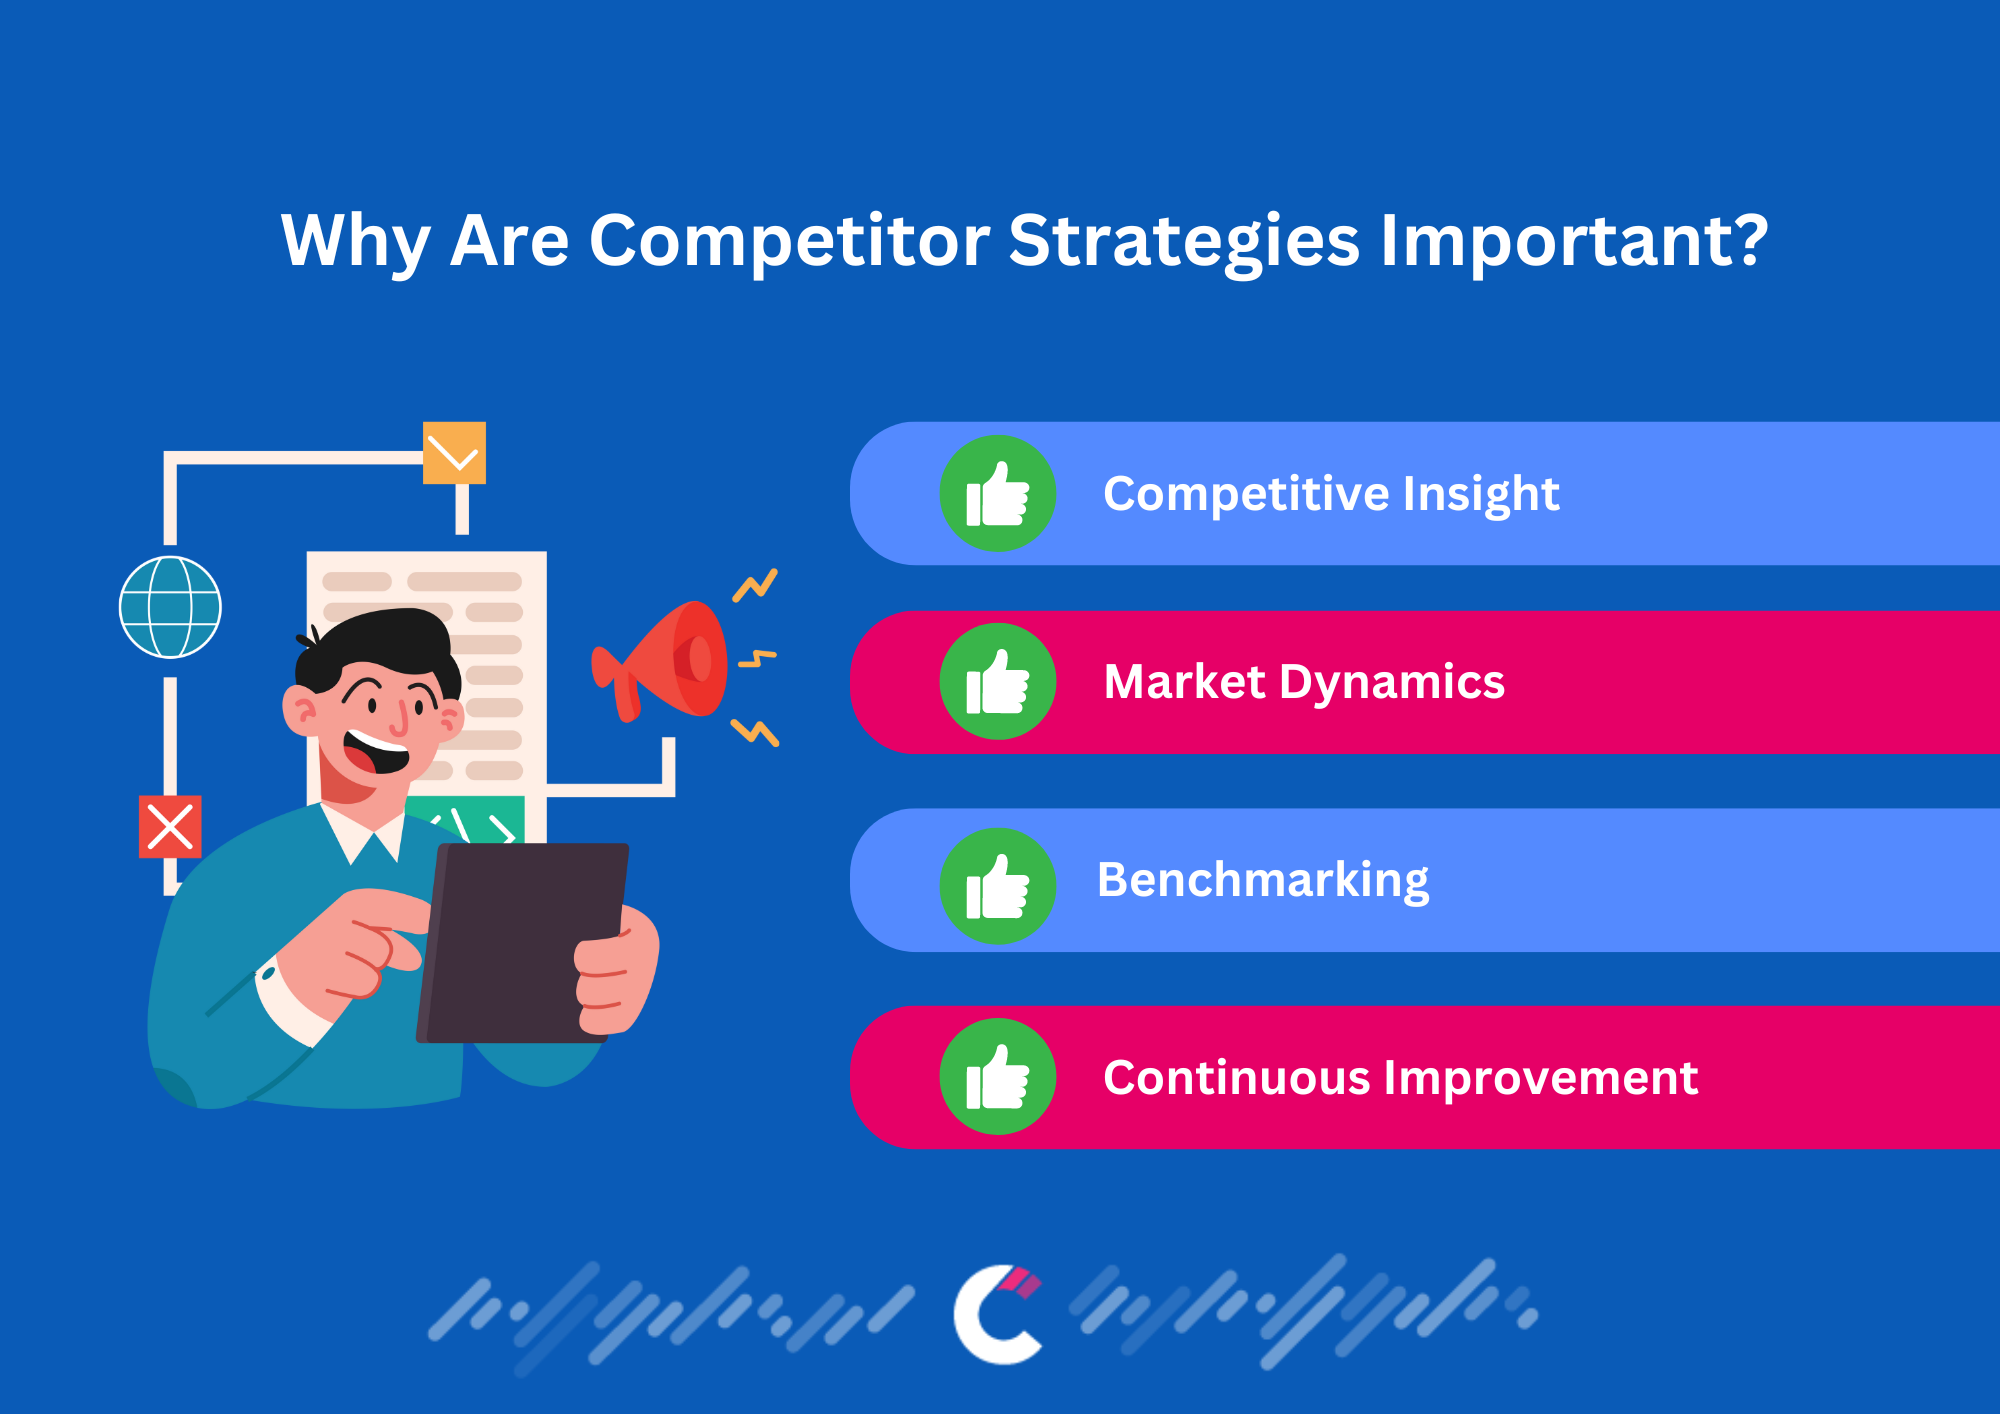 Why Are Competitor Strategies Important